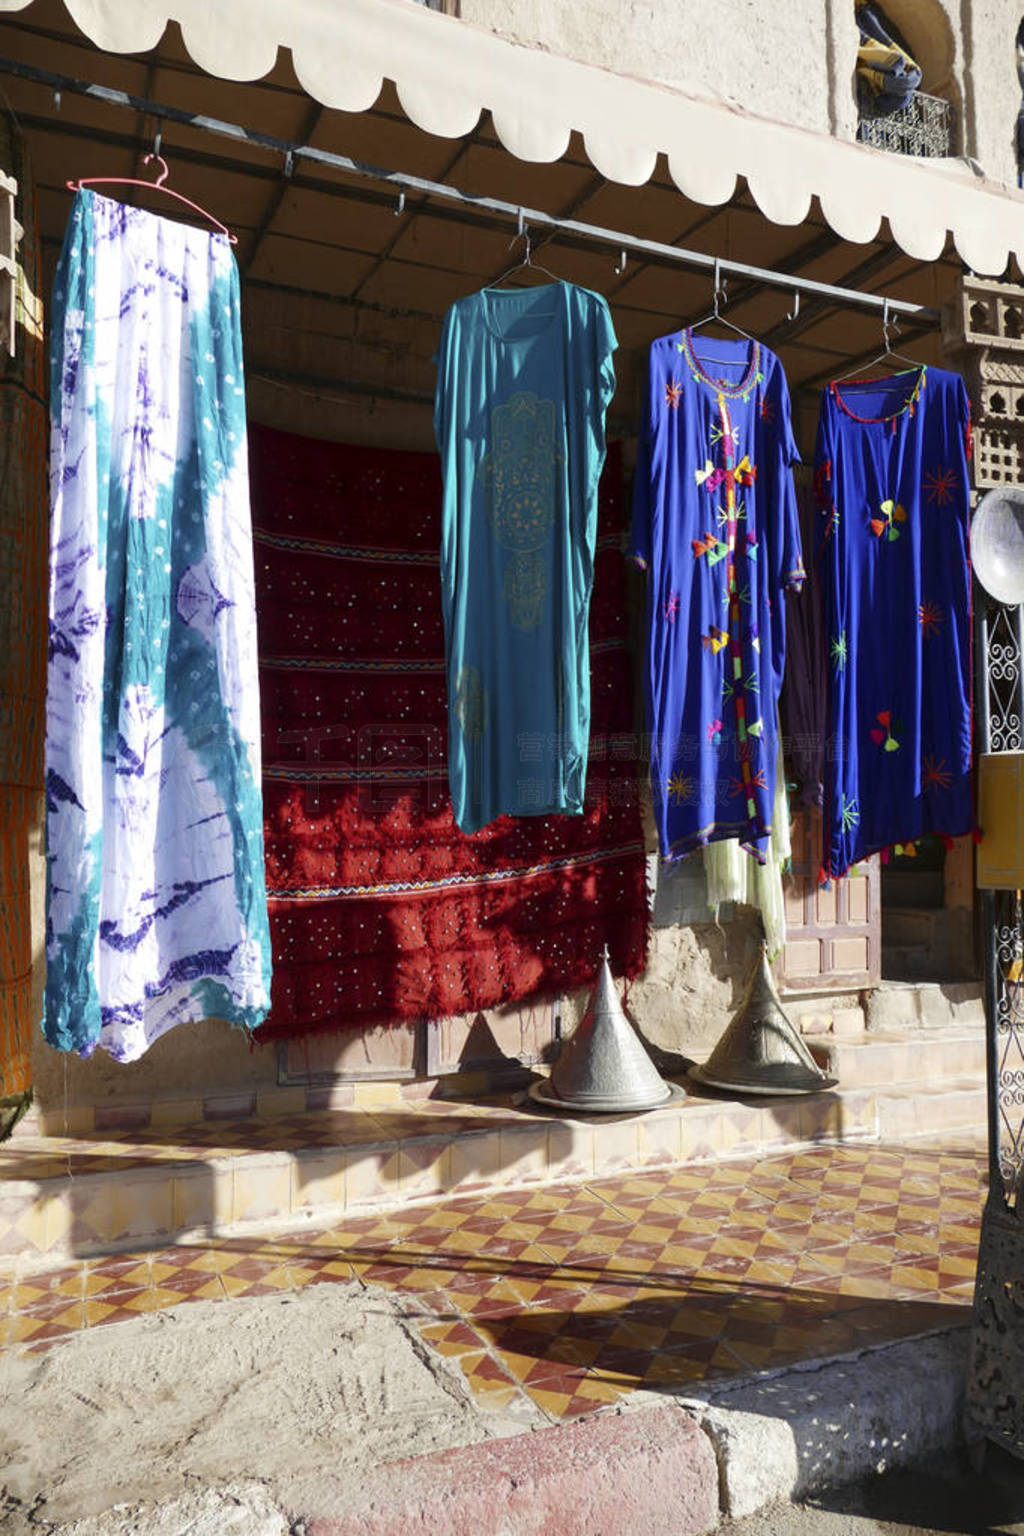 Traditional Berber dresses outside a store